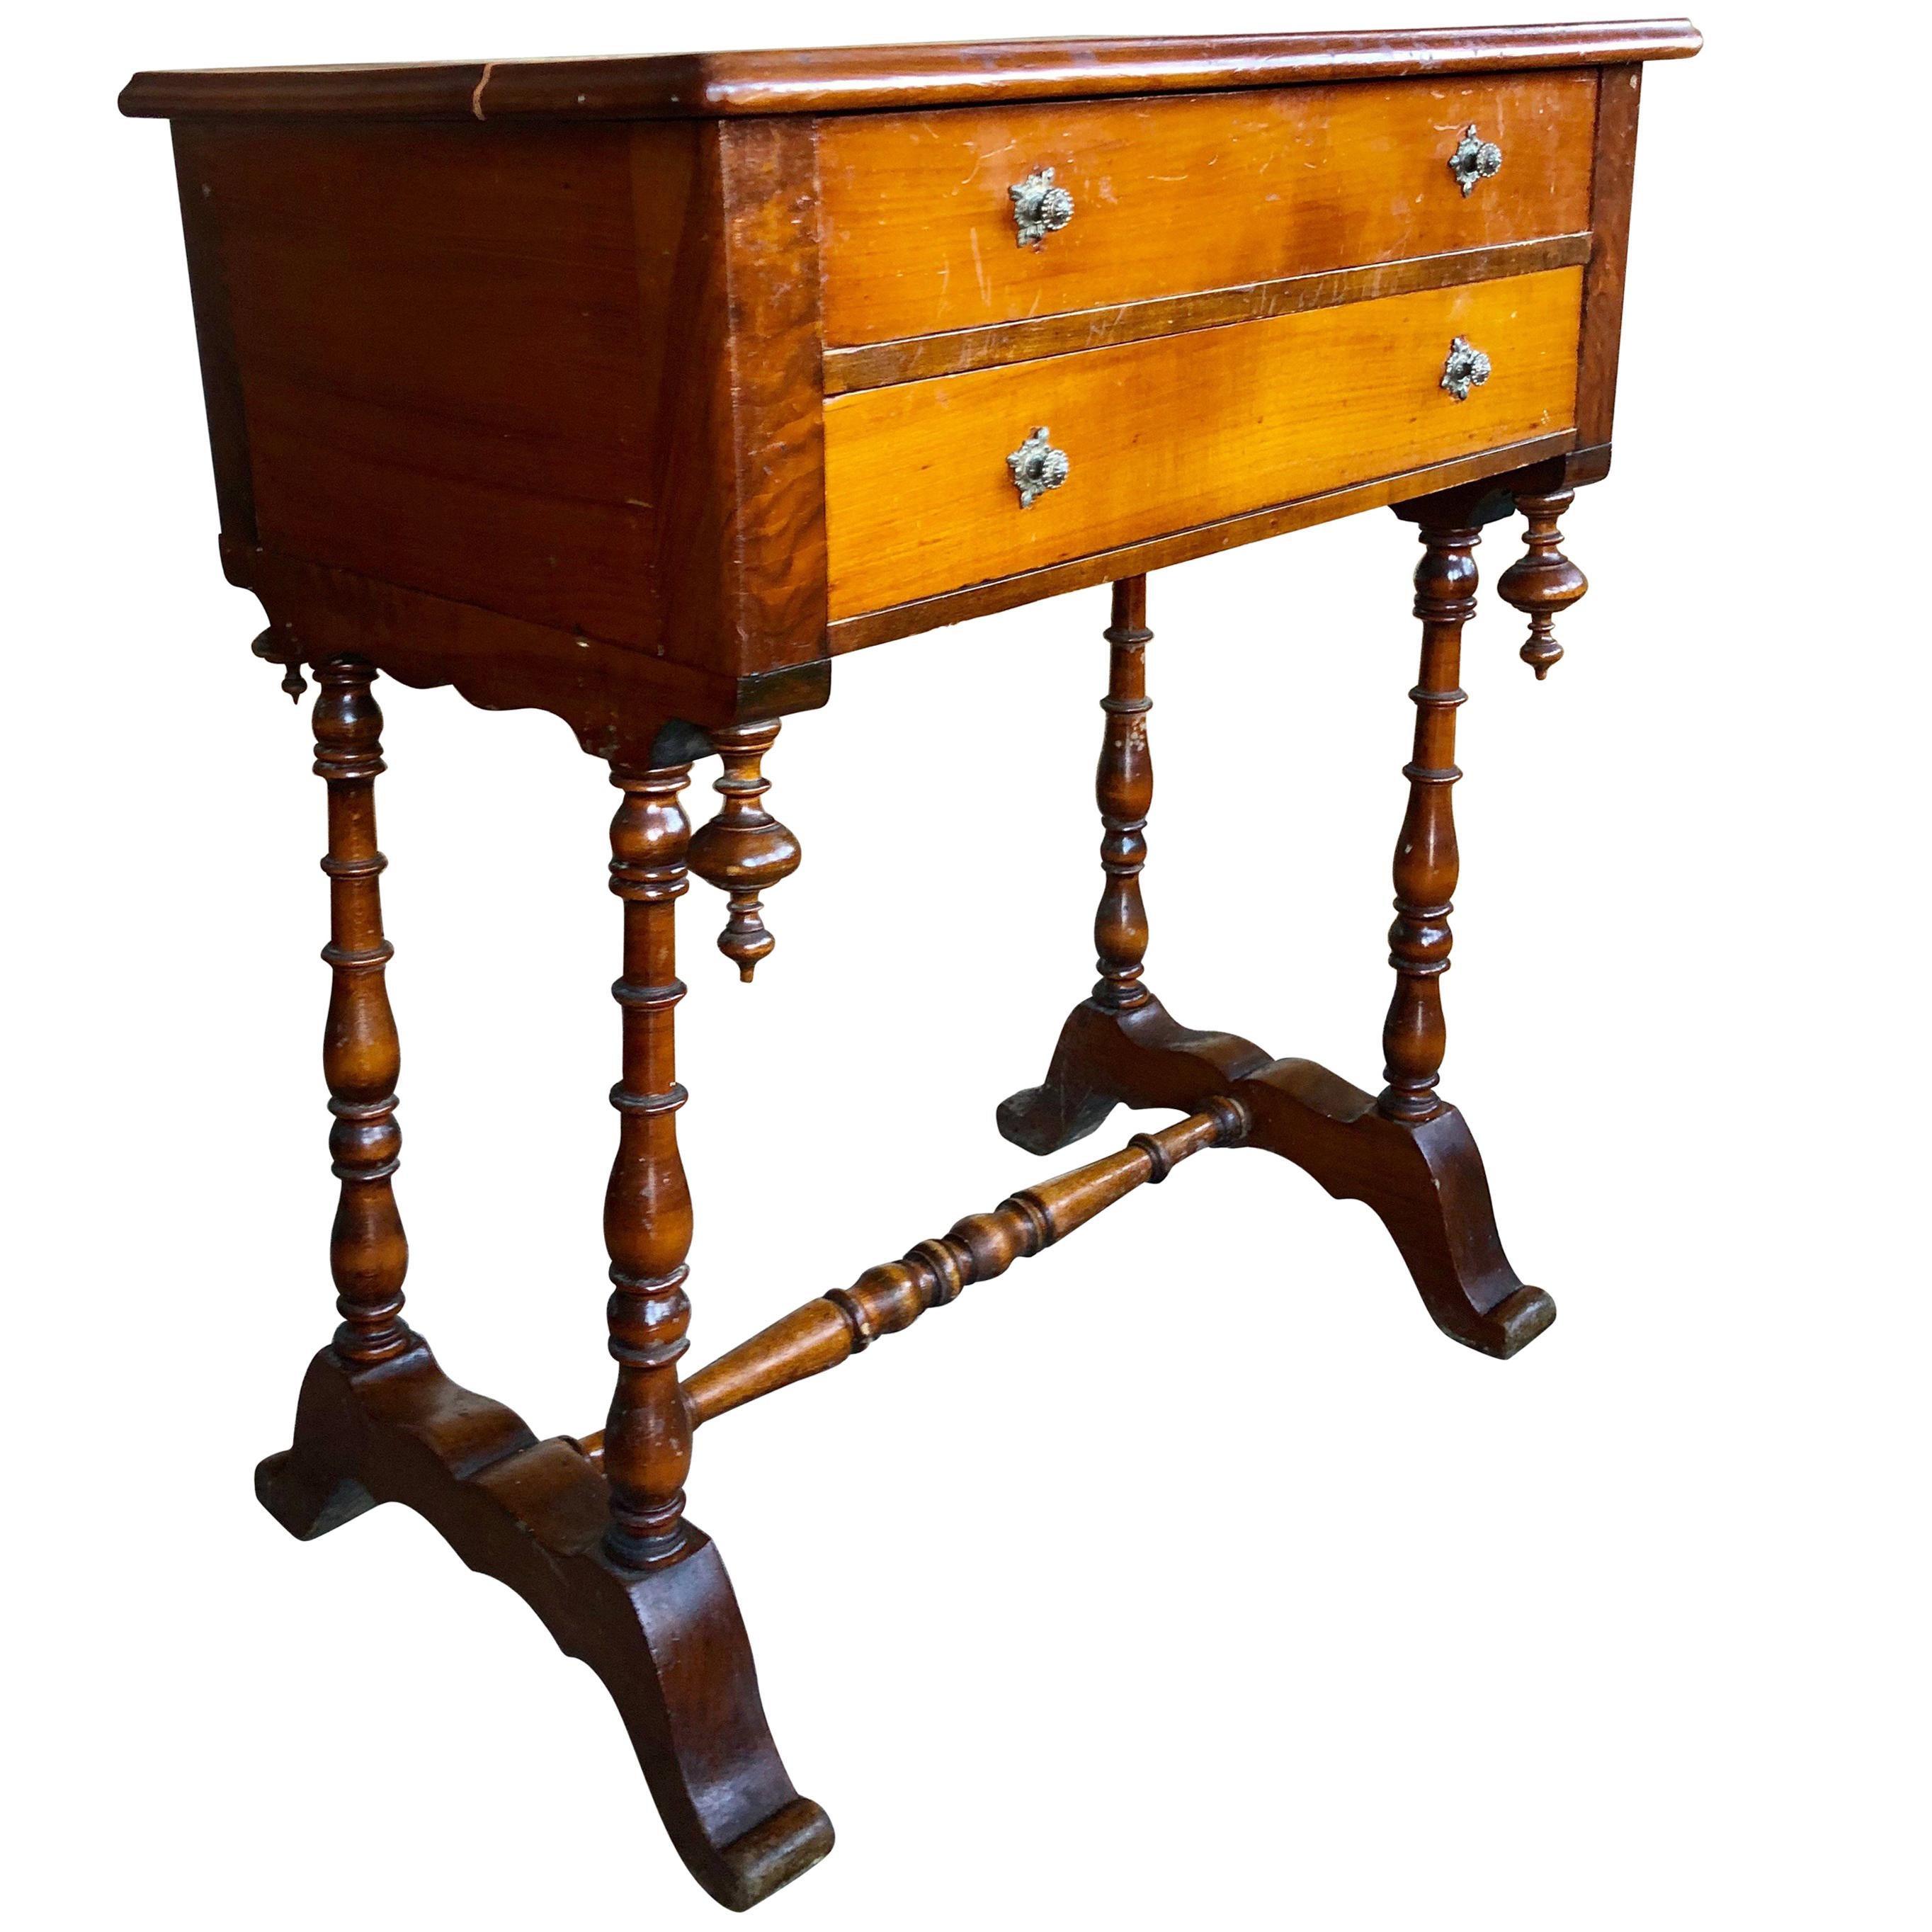 Victorian Gothic Revival Dressing Walnut Side Table, 19th Century ON SALE 